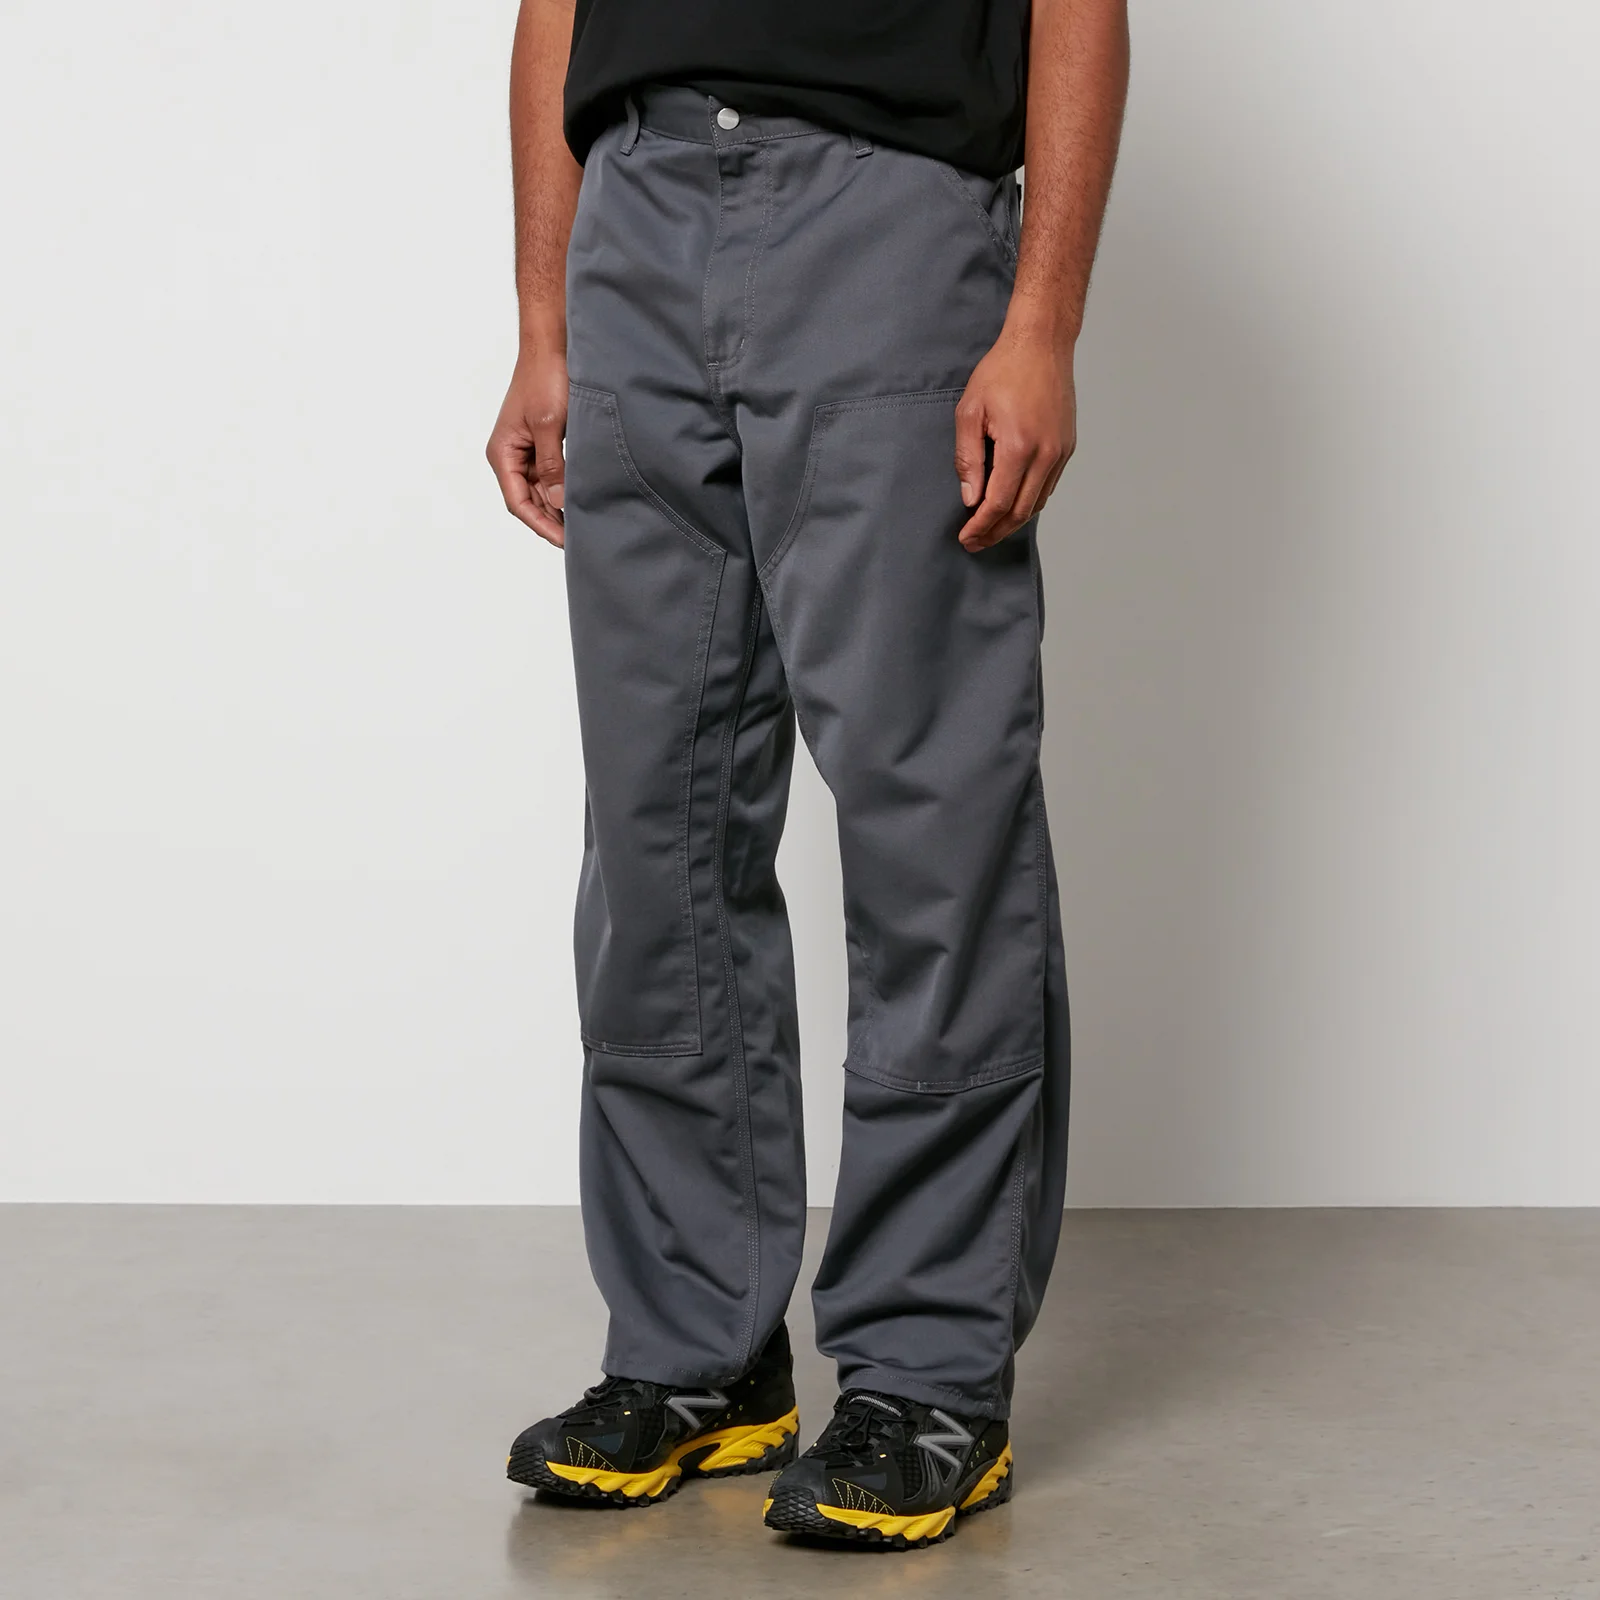 Carhartt WIP Double Knee Cotton-Twill Trousers - W30/L32 Image 1